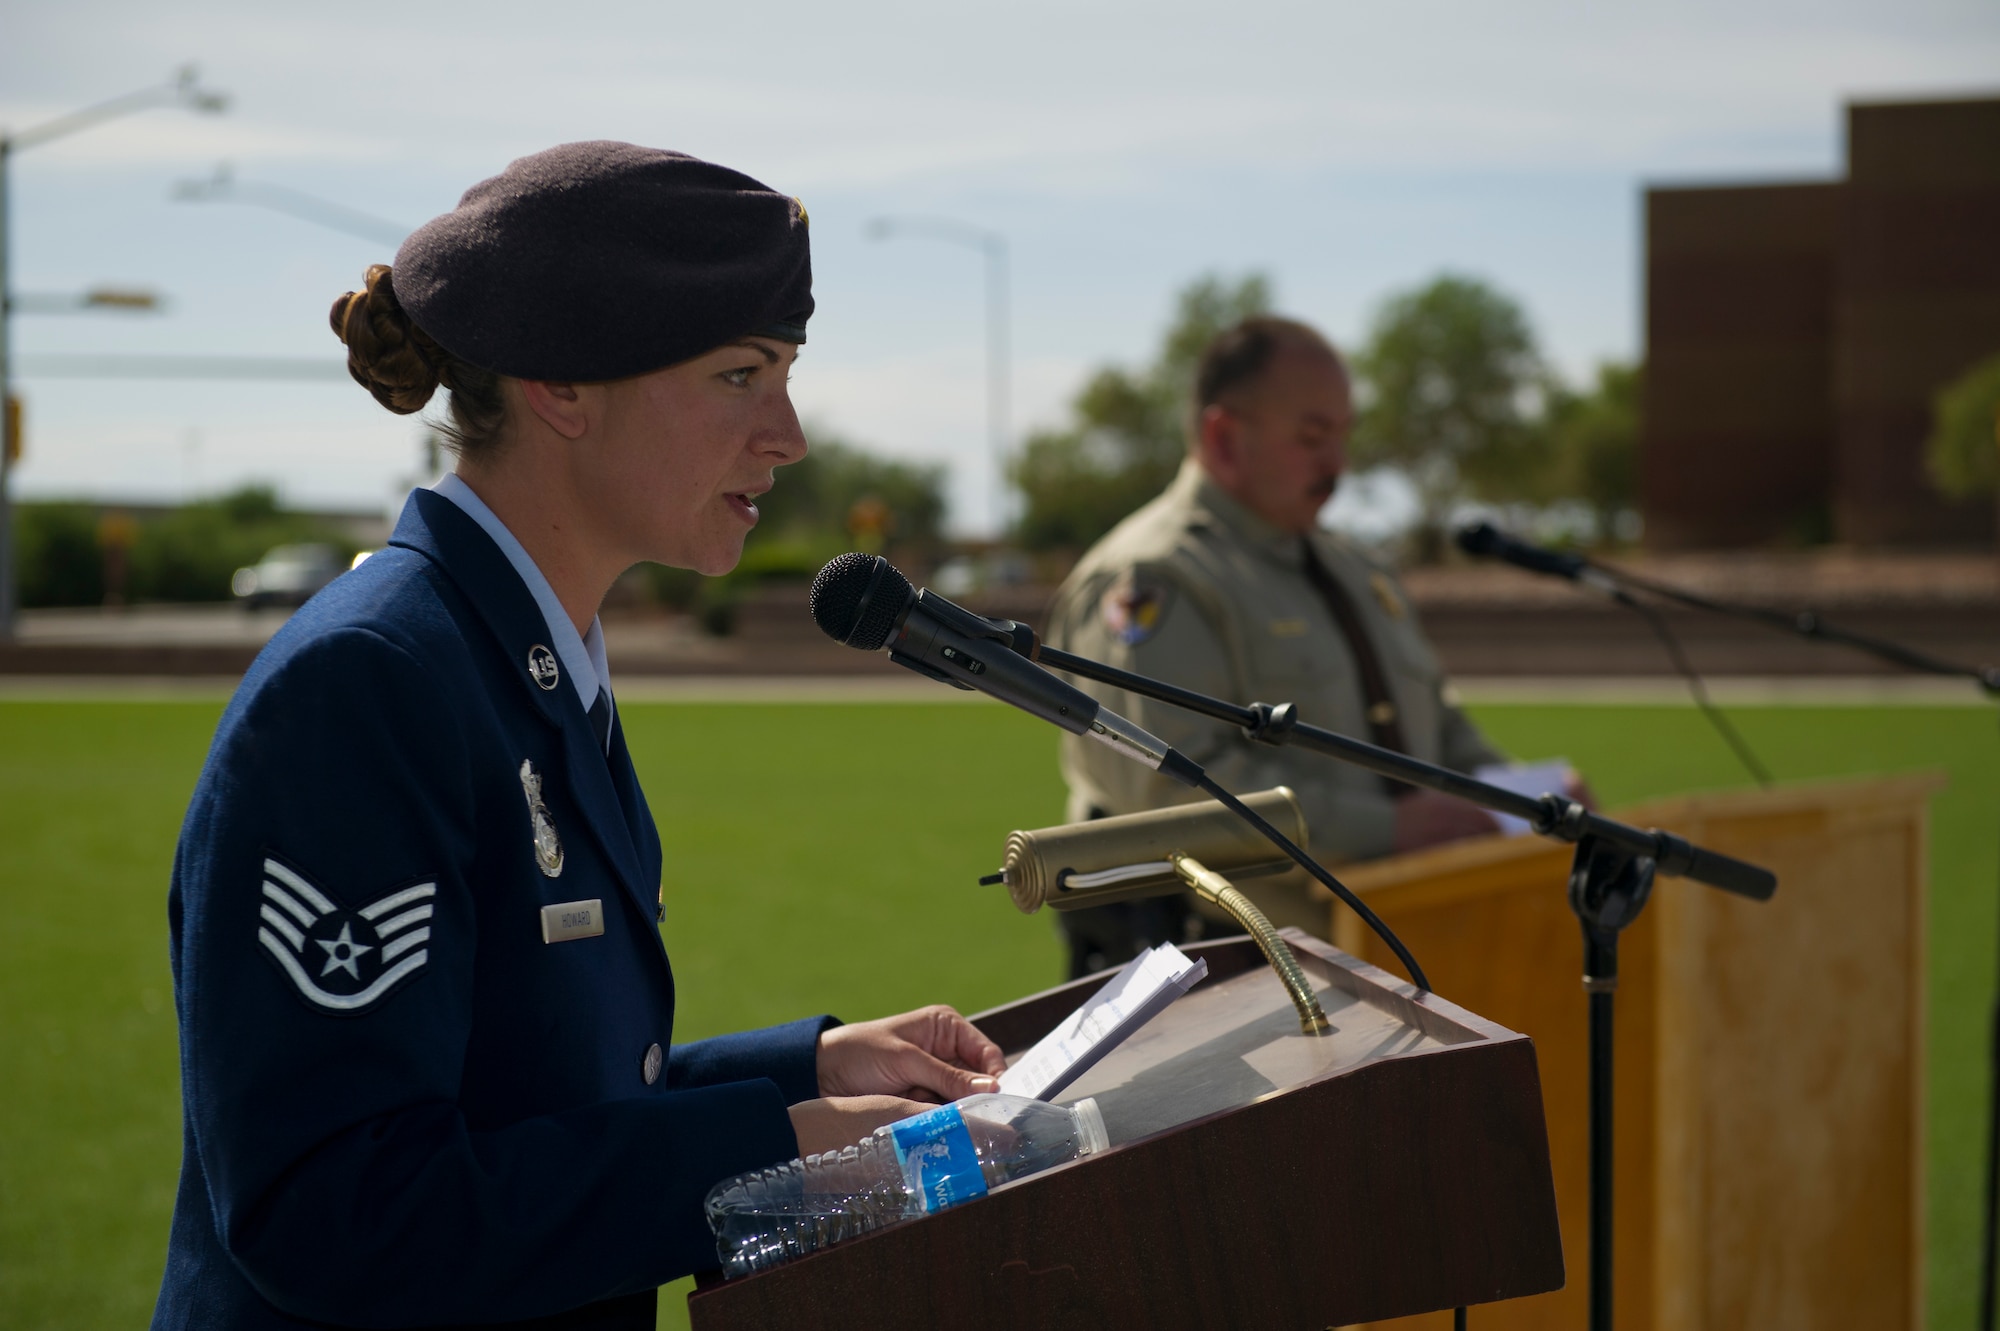 Staff Sgt. Alania Howard, 49th Security Forces Squadron duty position evaluator, serves as the master of ceremonies for the Police Week closing ceremony at Holloman Air Force Base, N.M., May 16. According to the National Police Week website, President John F.  Kennedy signed a proclamation in 1962 that designated May 15 as Peace Officers Memorial Day and the week in which that date falls as National Police Week. Since the inception of National Police Week, the United States Air Force has lost 120 military and civilian law enforcement officers. (U.S. Air Force photo by Airman 1st Class Aaron Montoya / Released)